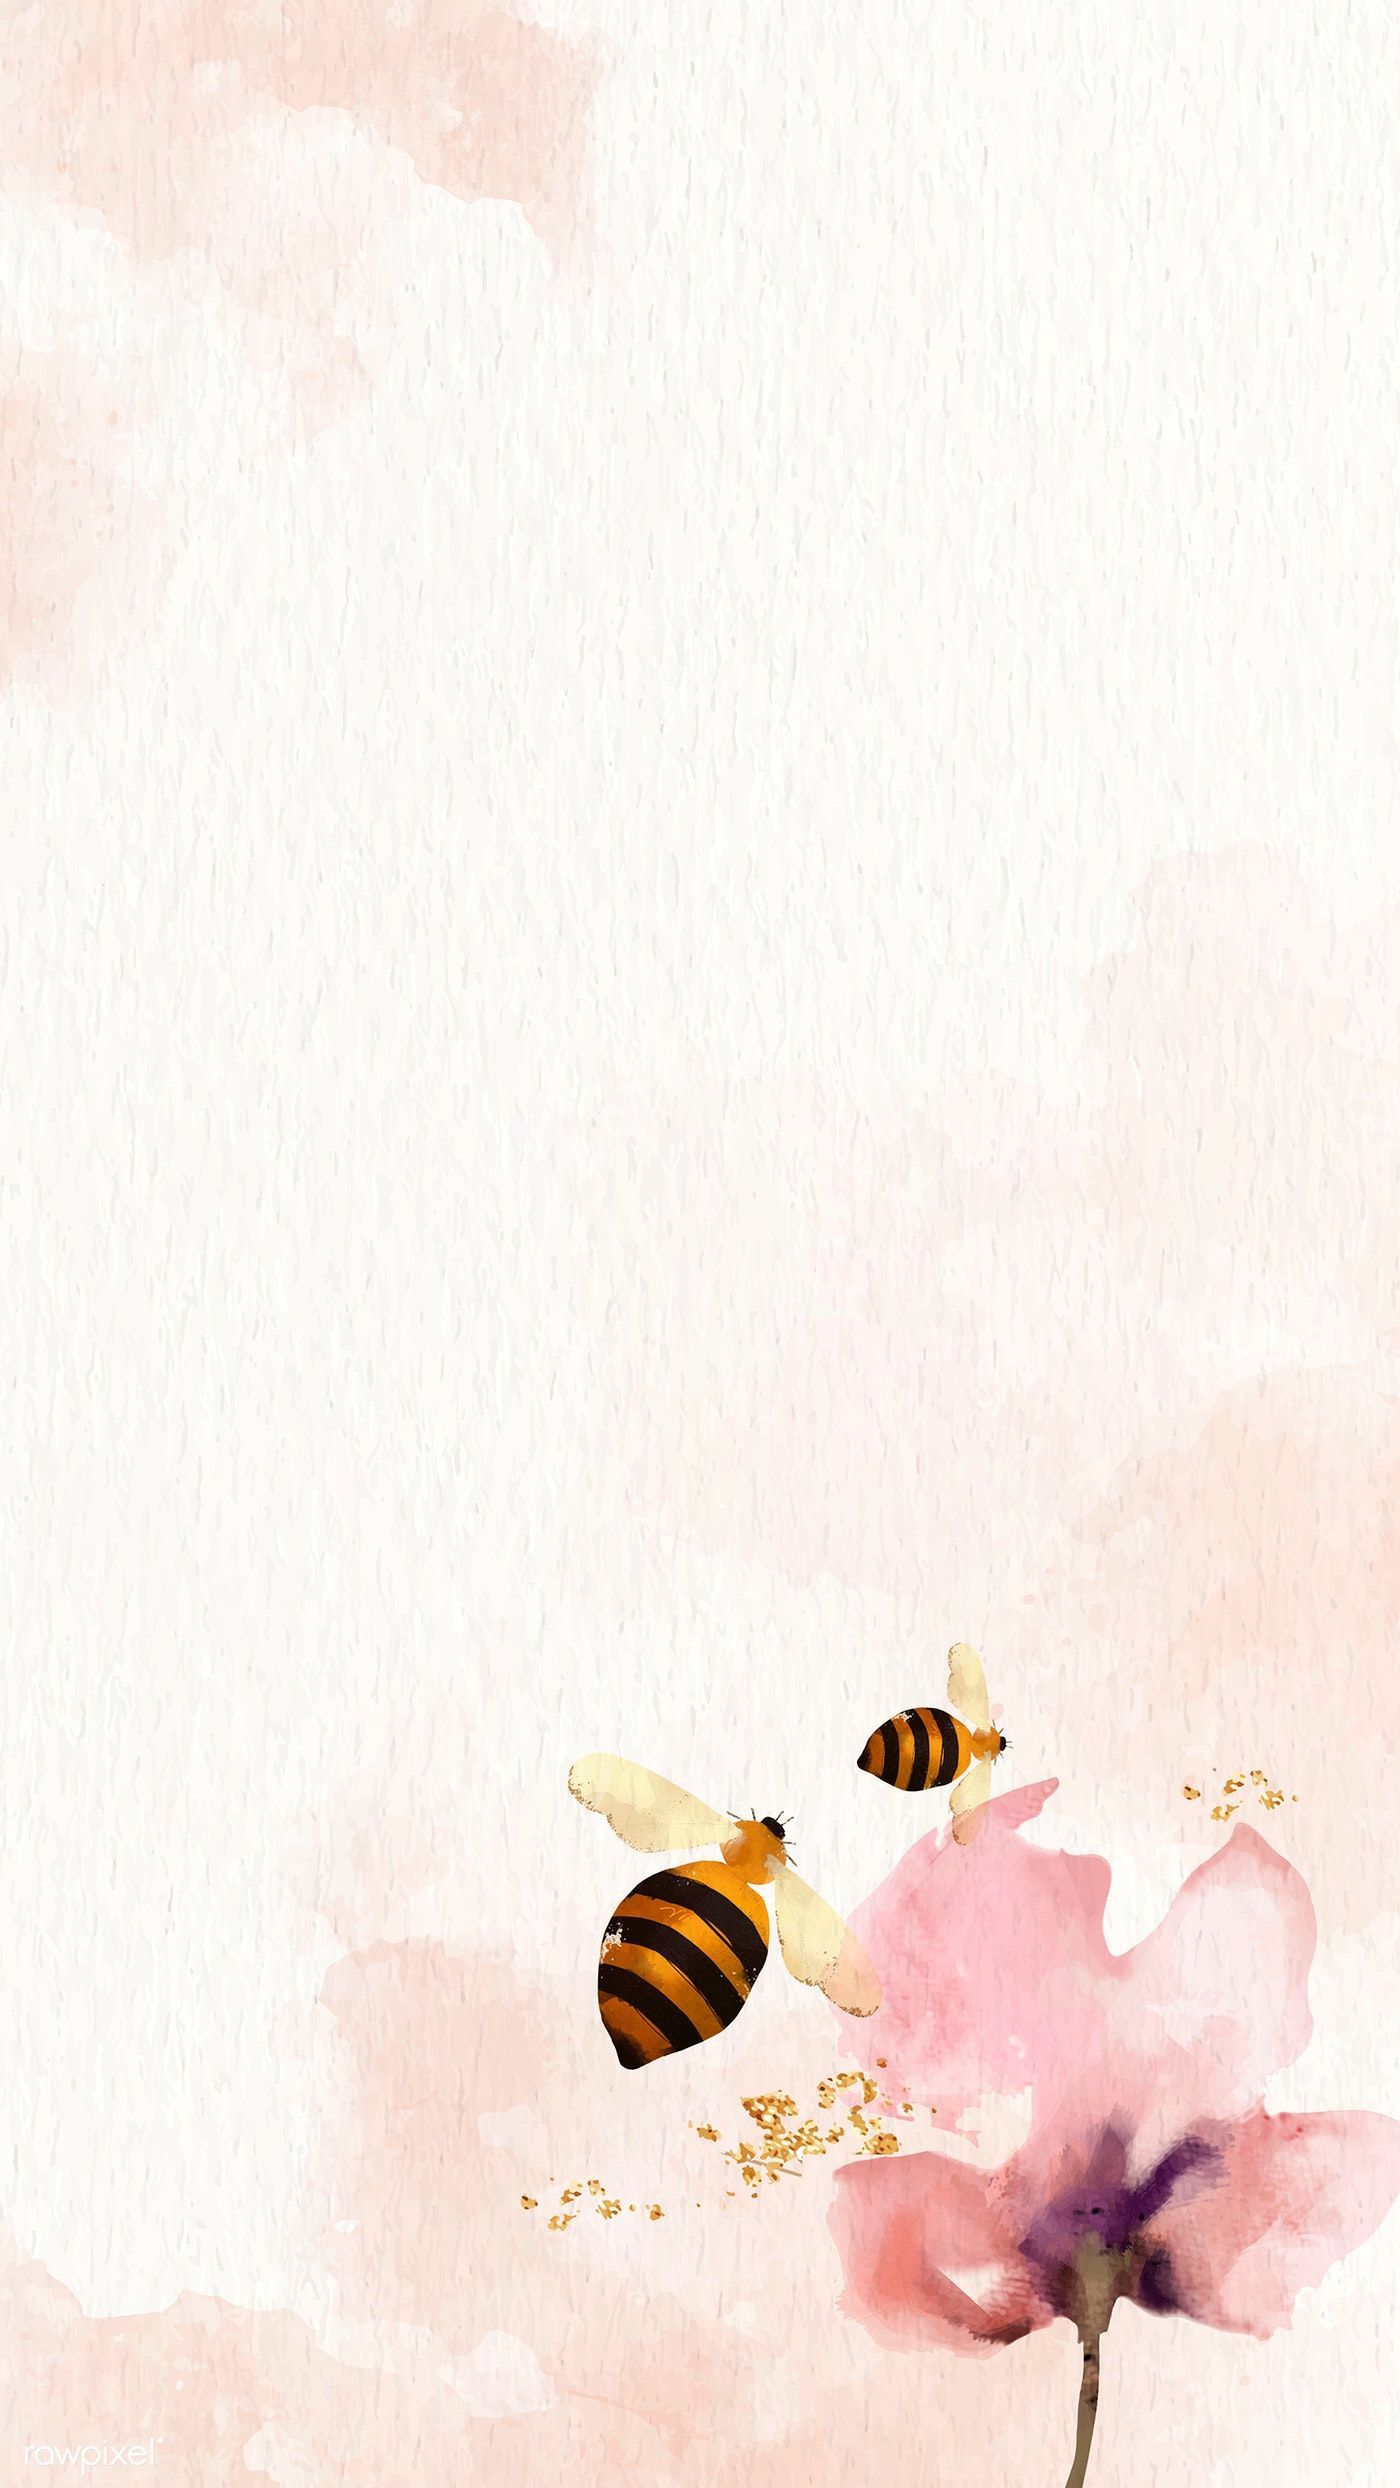 Download premium vector of Honey Bees and flower watercolor background. Watercolor flower background, Watercolor wallpaper iphone, Watercolor wallpaper phone